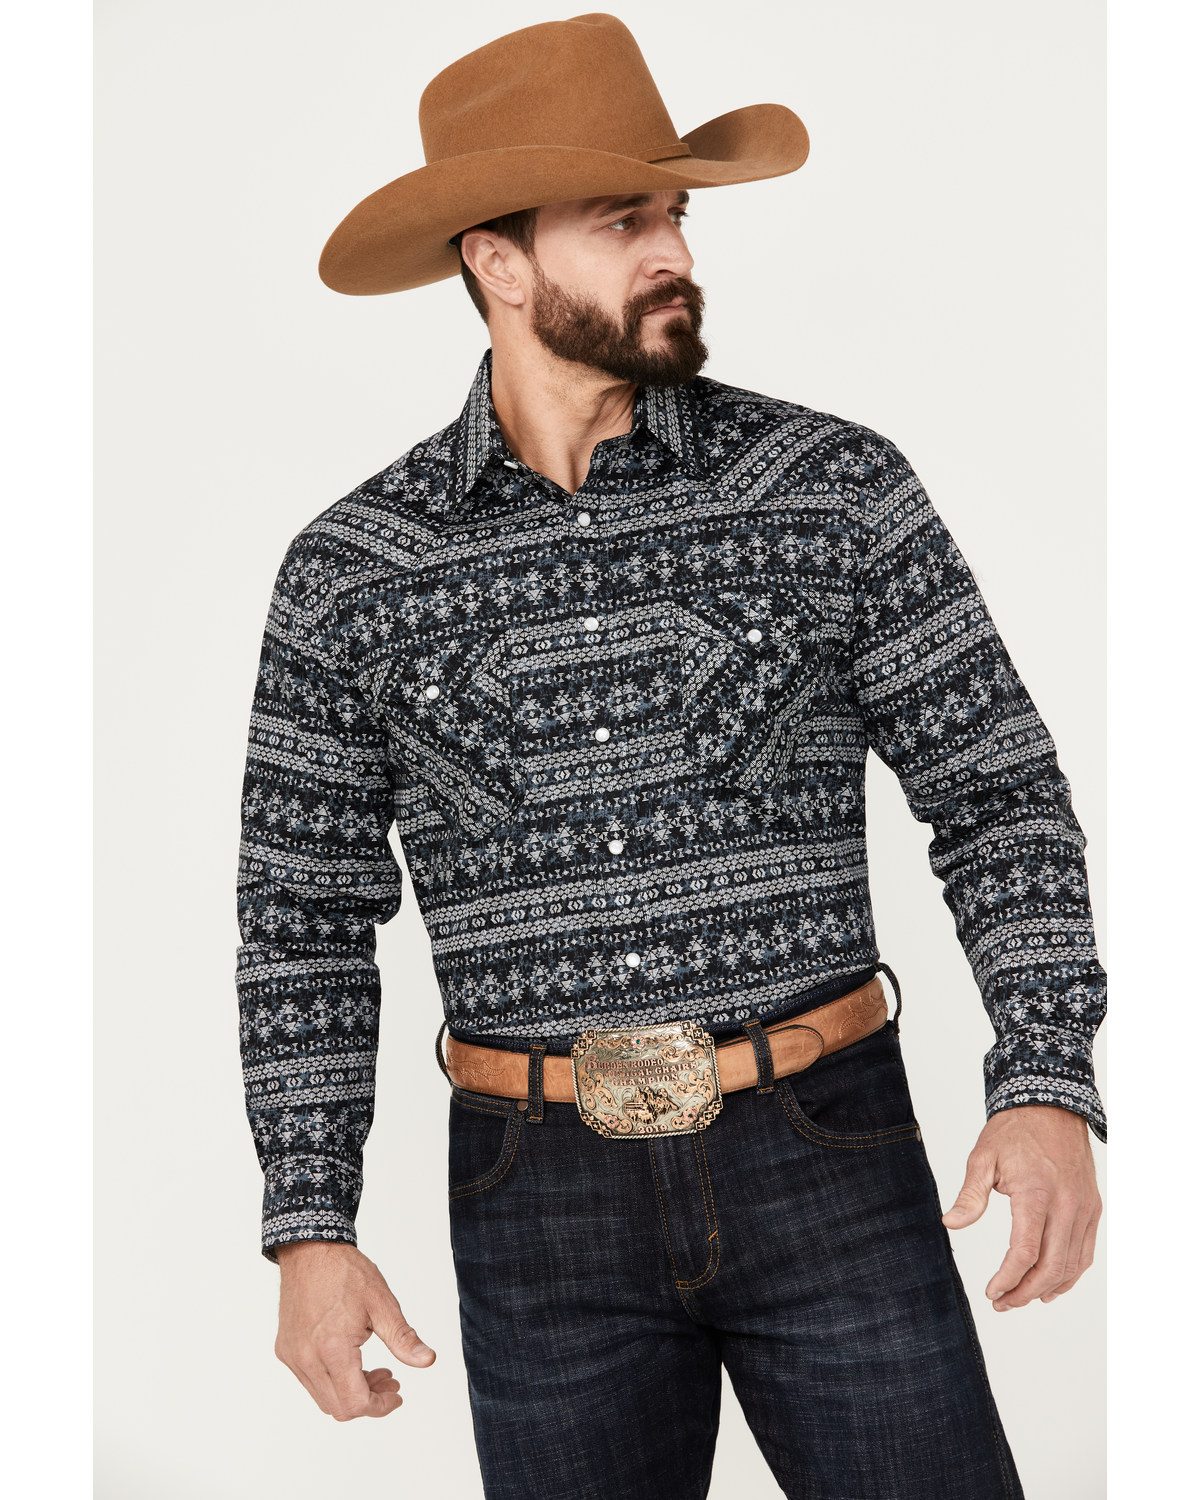 Rough Stock by Panhandle Men's Southwestern Stretch Long Sleeve Western Pearl Snap Shirt